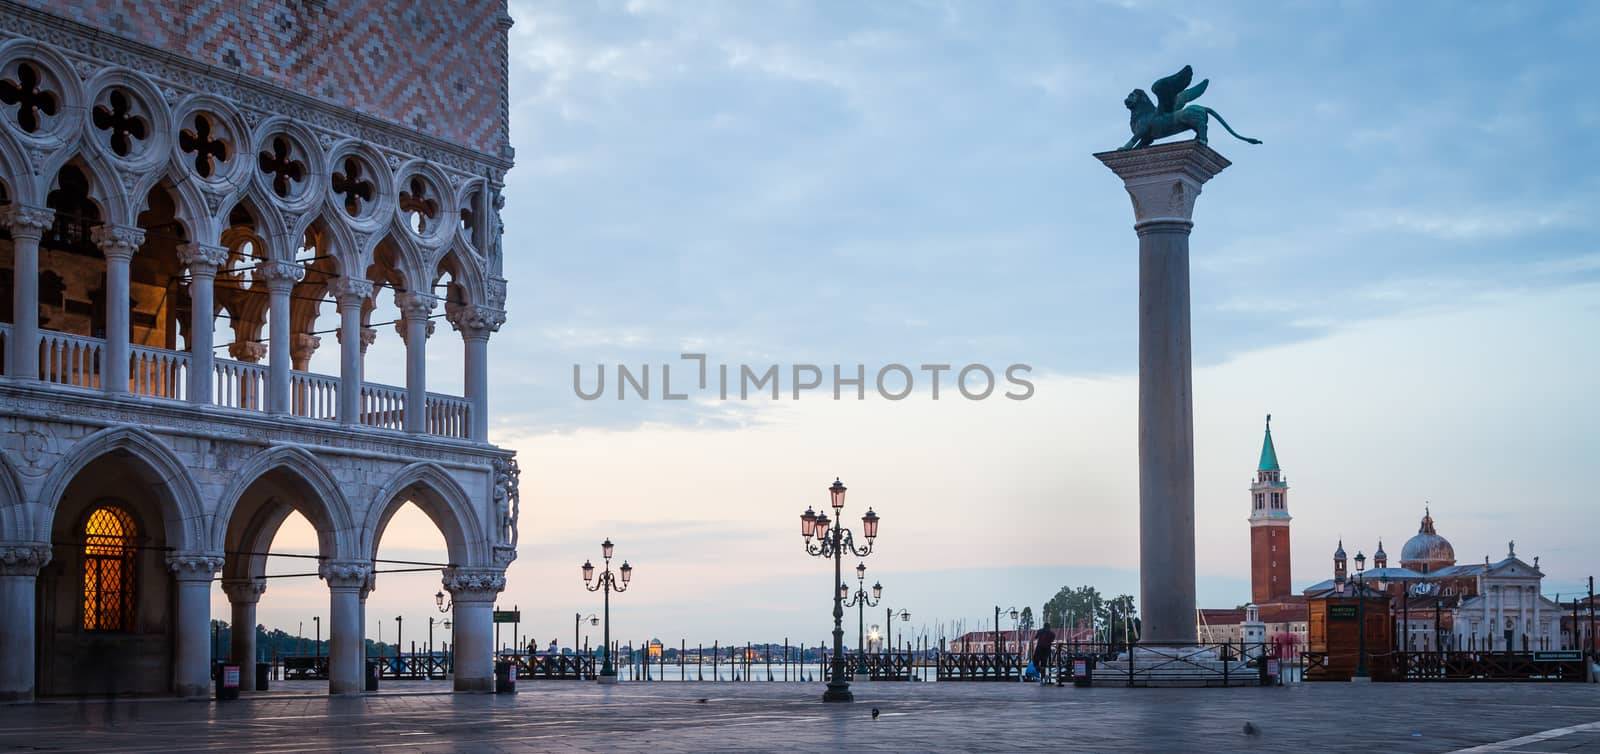 Venice, Italy - Piazza San Marco at sunrise